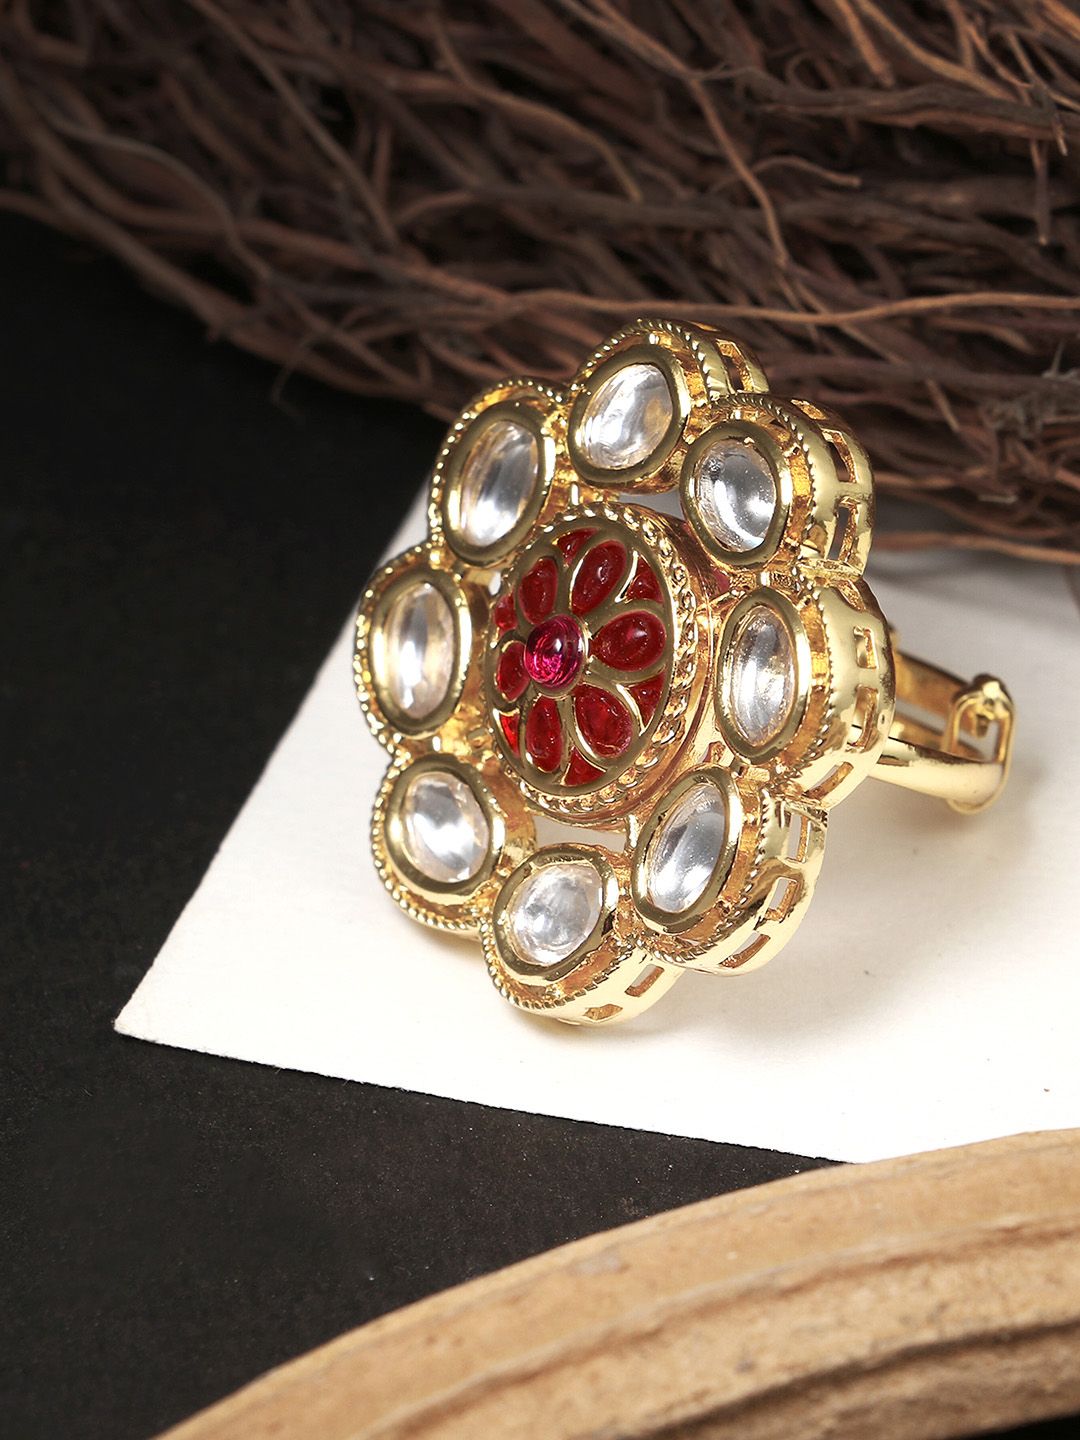 Adwitiya Collection Gold-Plated Maroon & White Kundan-Studded Adjustable Finger Ring Price in India